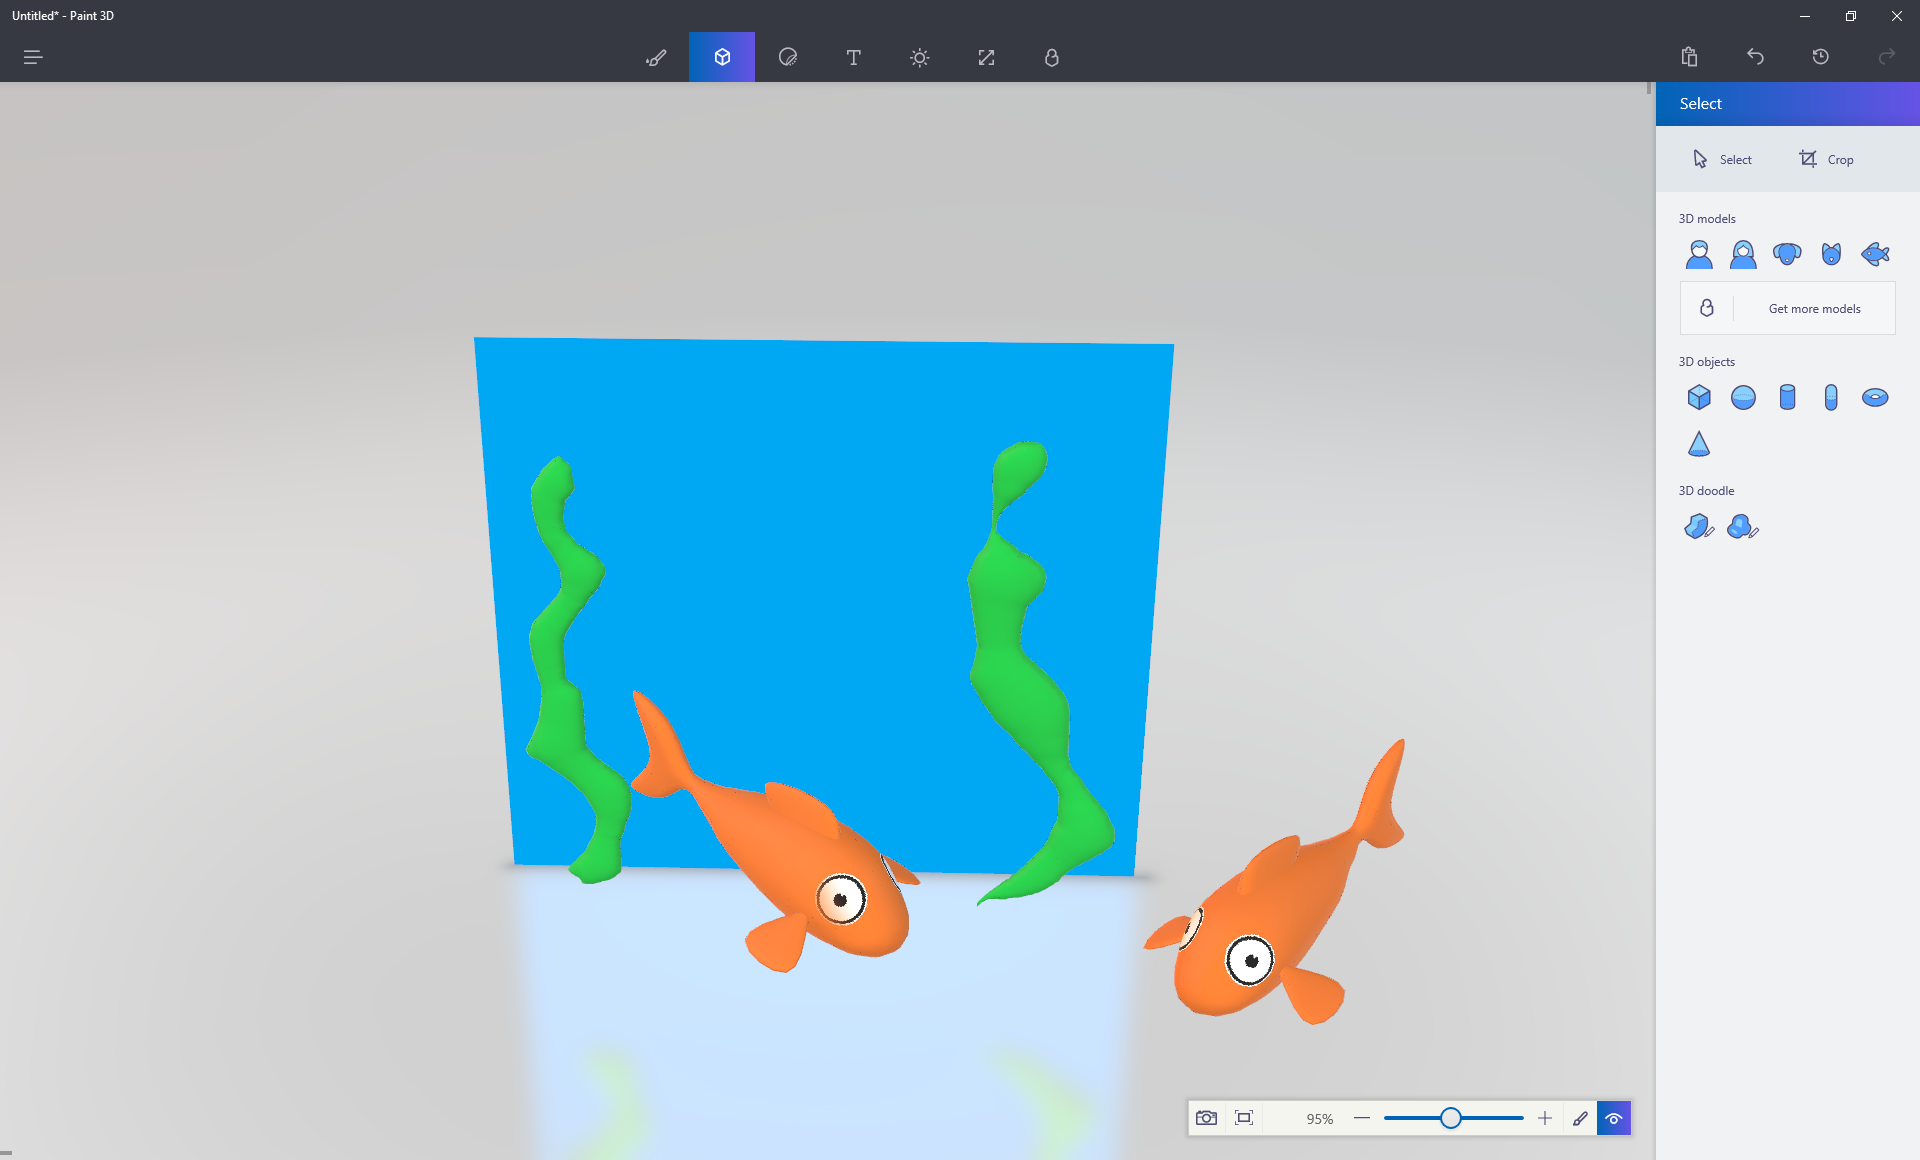 microsoft paint 3d free download for windows 10